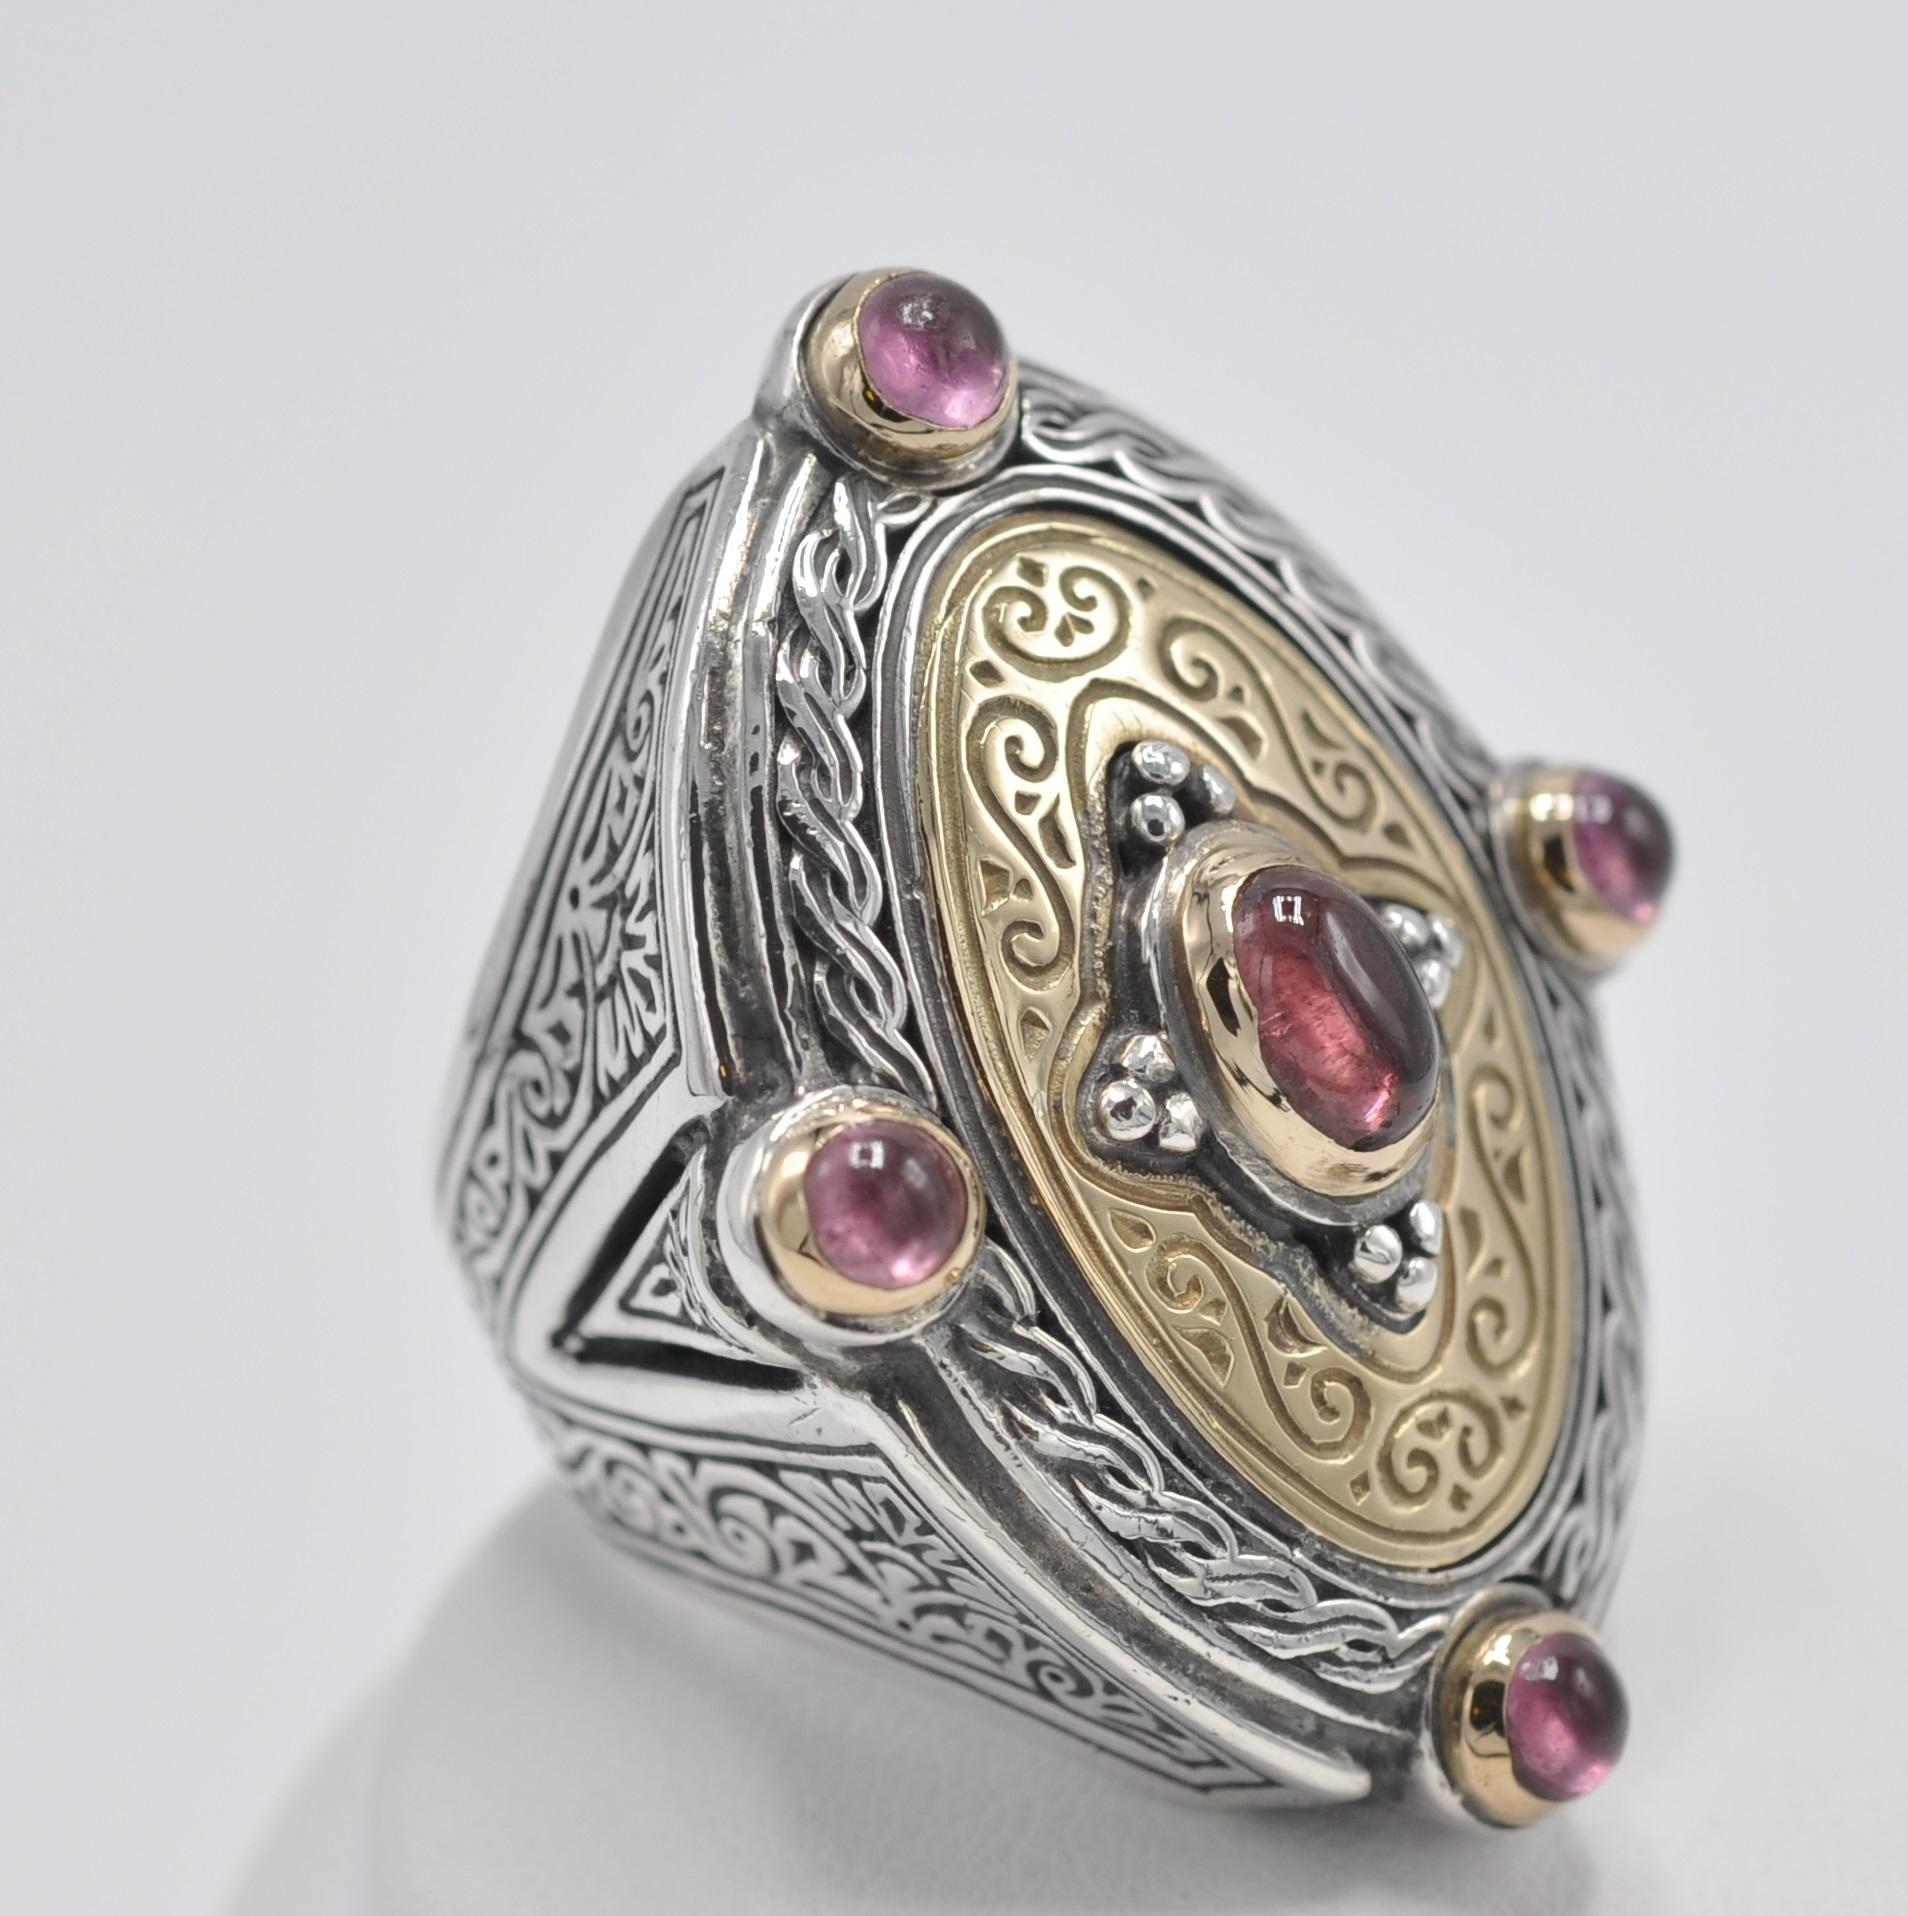 This beautiful example of Konstantino's attention to detail and incredible craftsmanship is a true piece of art. The ring is made of Sterling Silver and 18k Yellow Gold and has roughly 1.25 carats of cabochons of Pink Tourmalines. The ring is